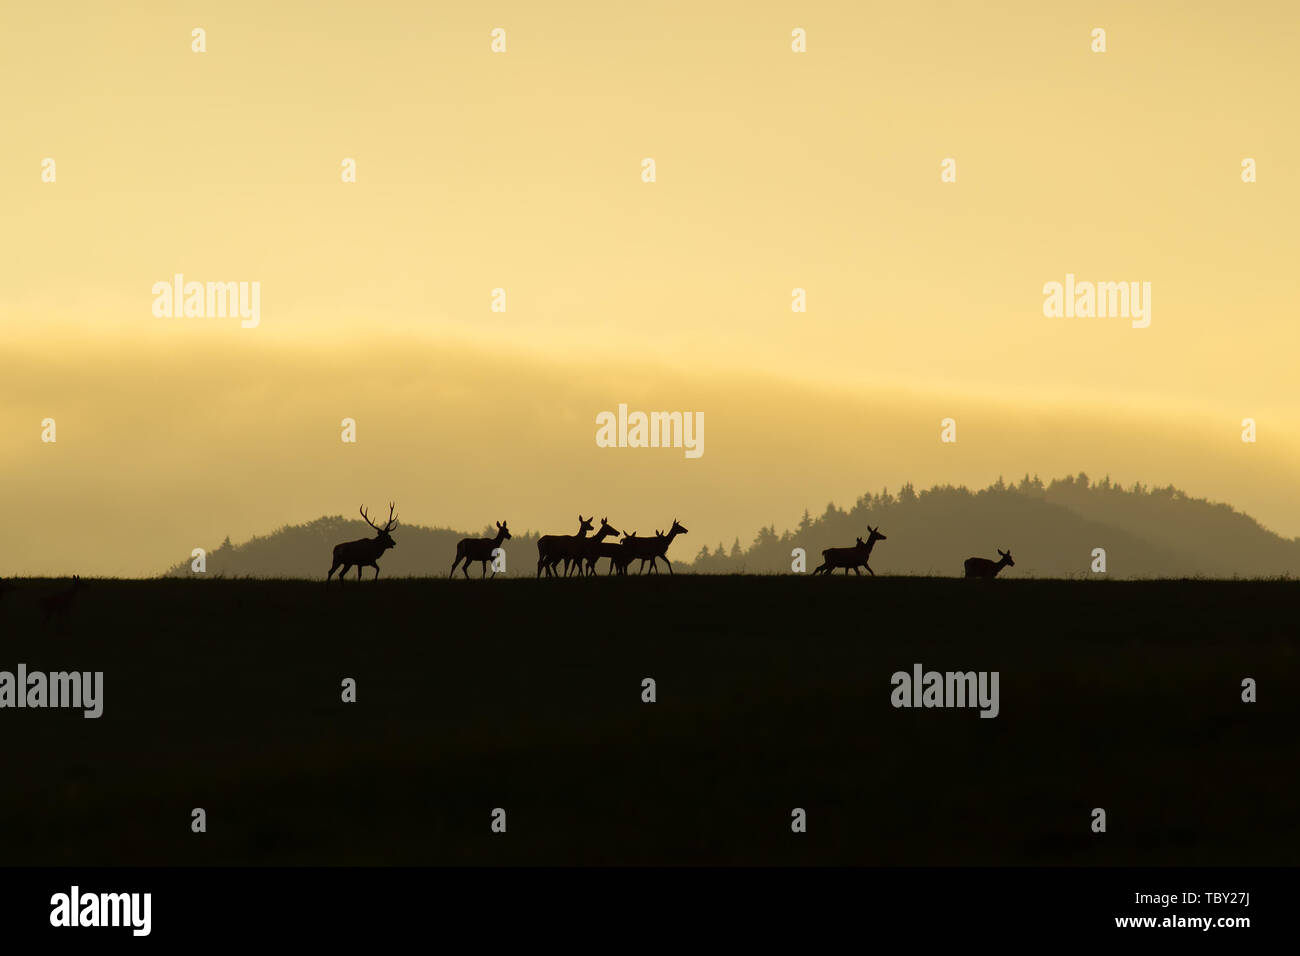 Herd of red deer with does and stag walking at the end at sunset on a horizon Stock Photo